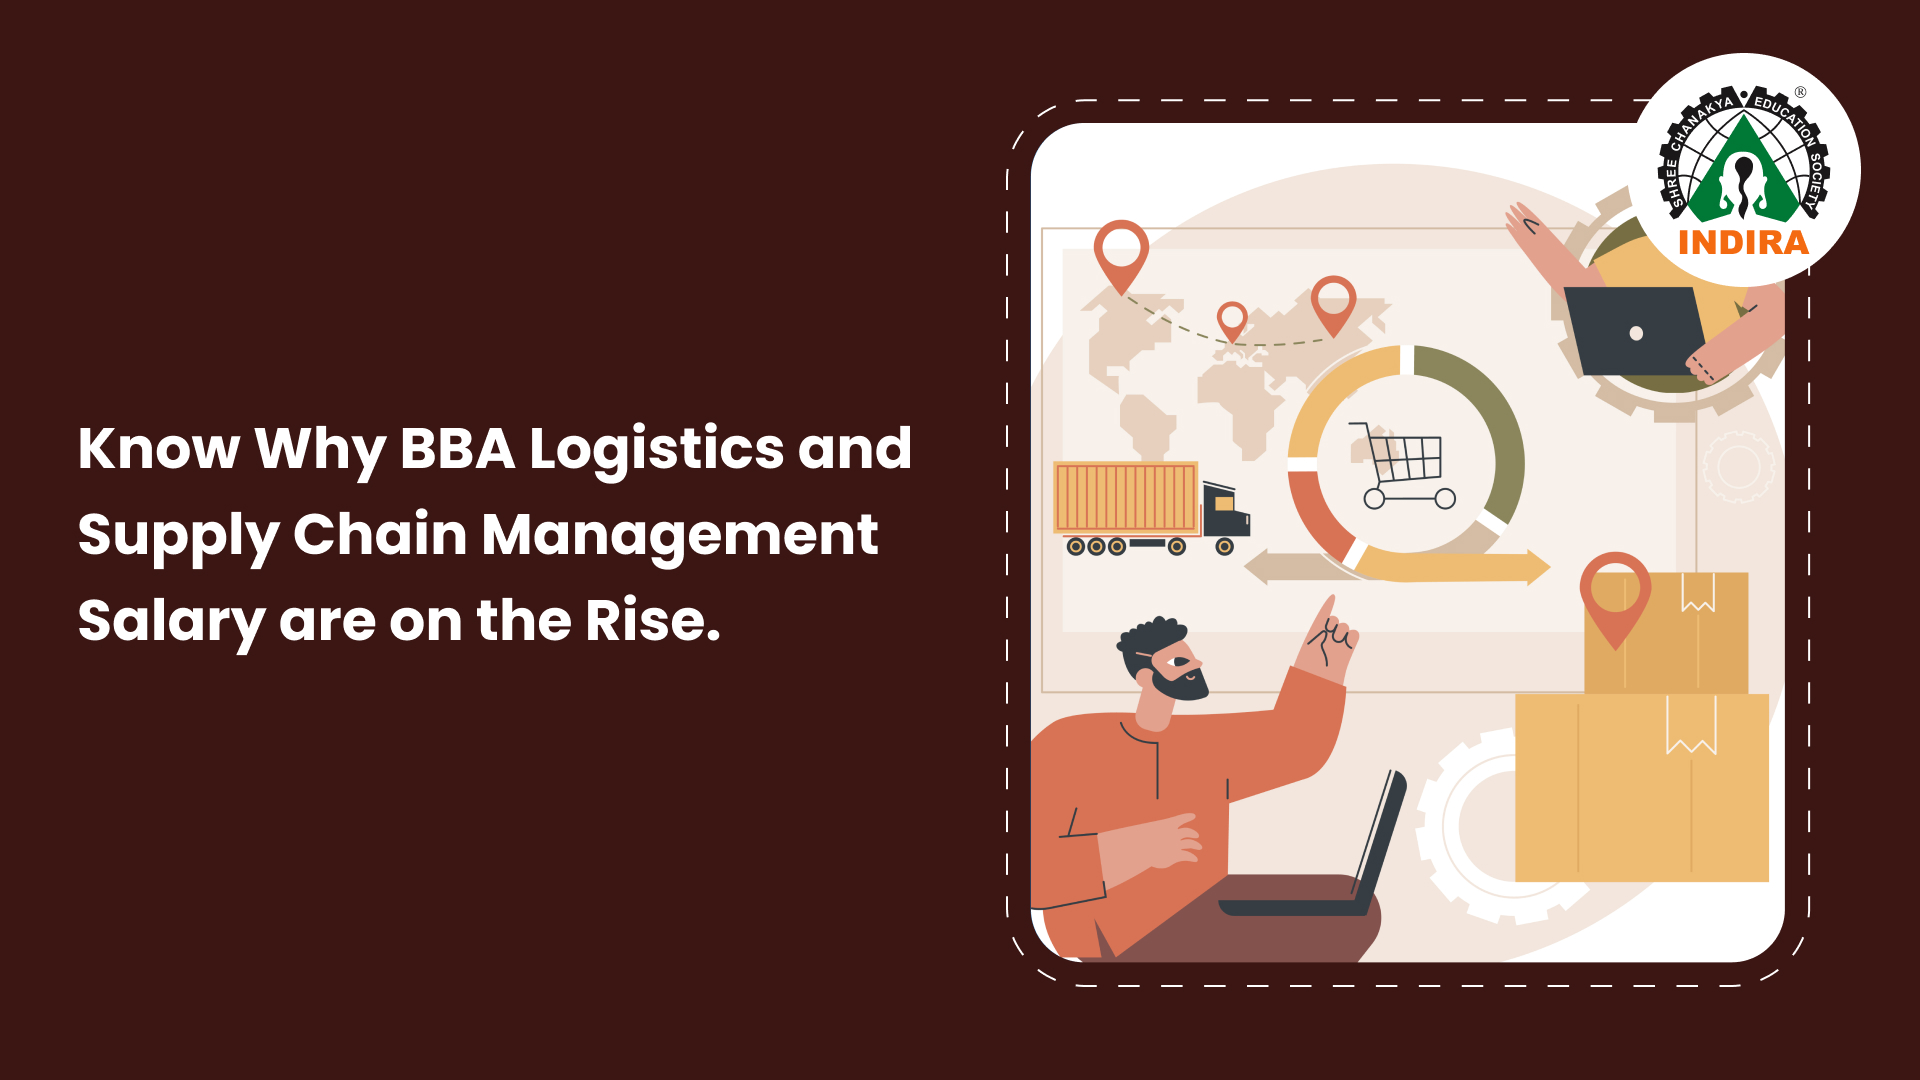  Know Why BBA Logistics and Supply Chain Management Salary are on the Rise.